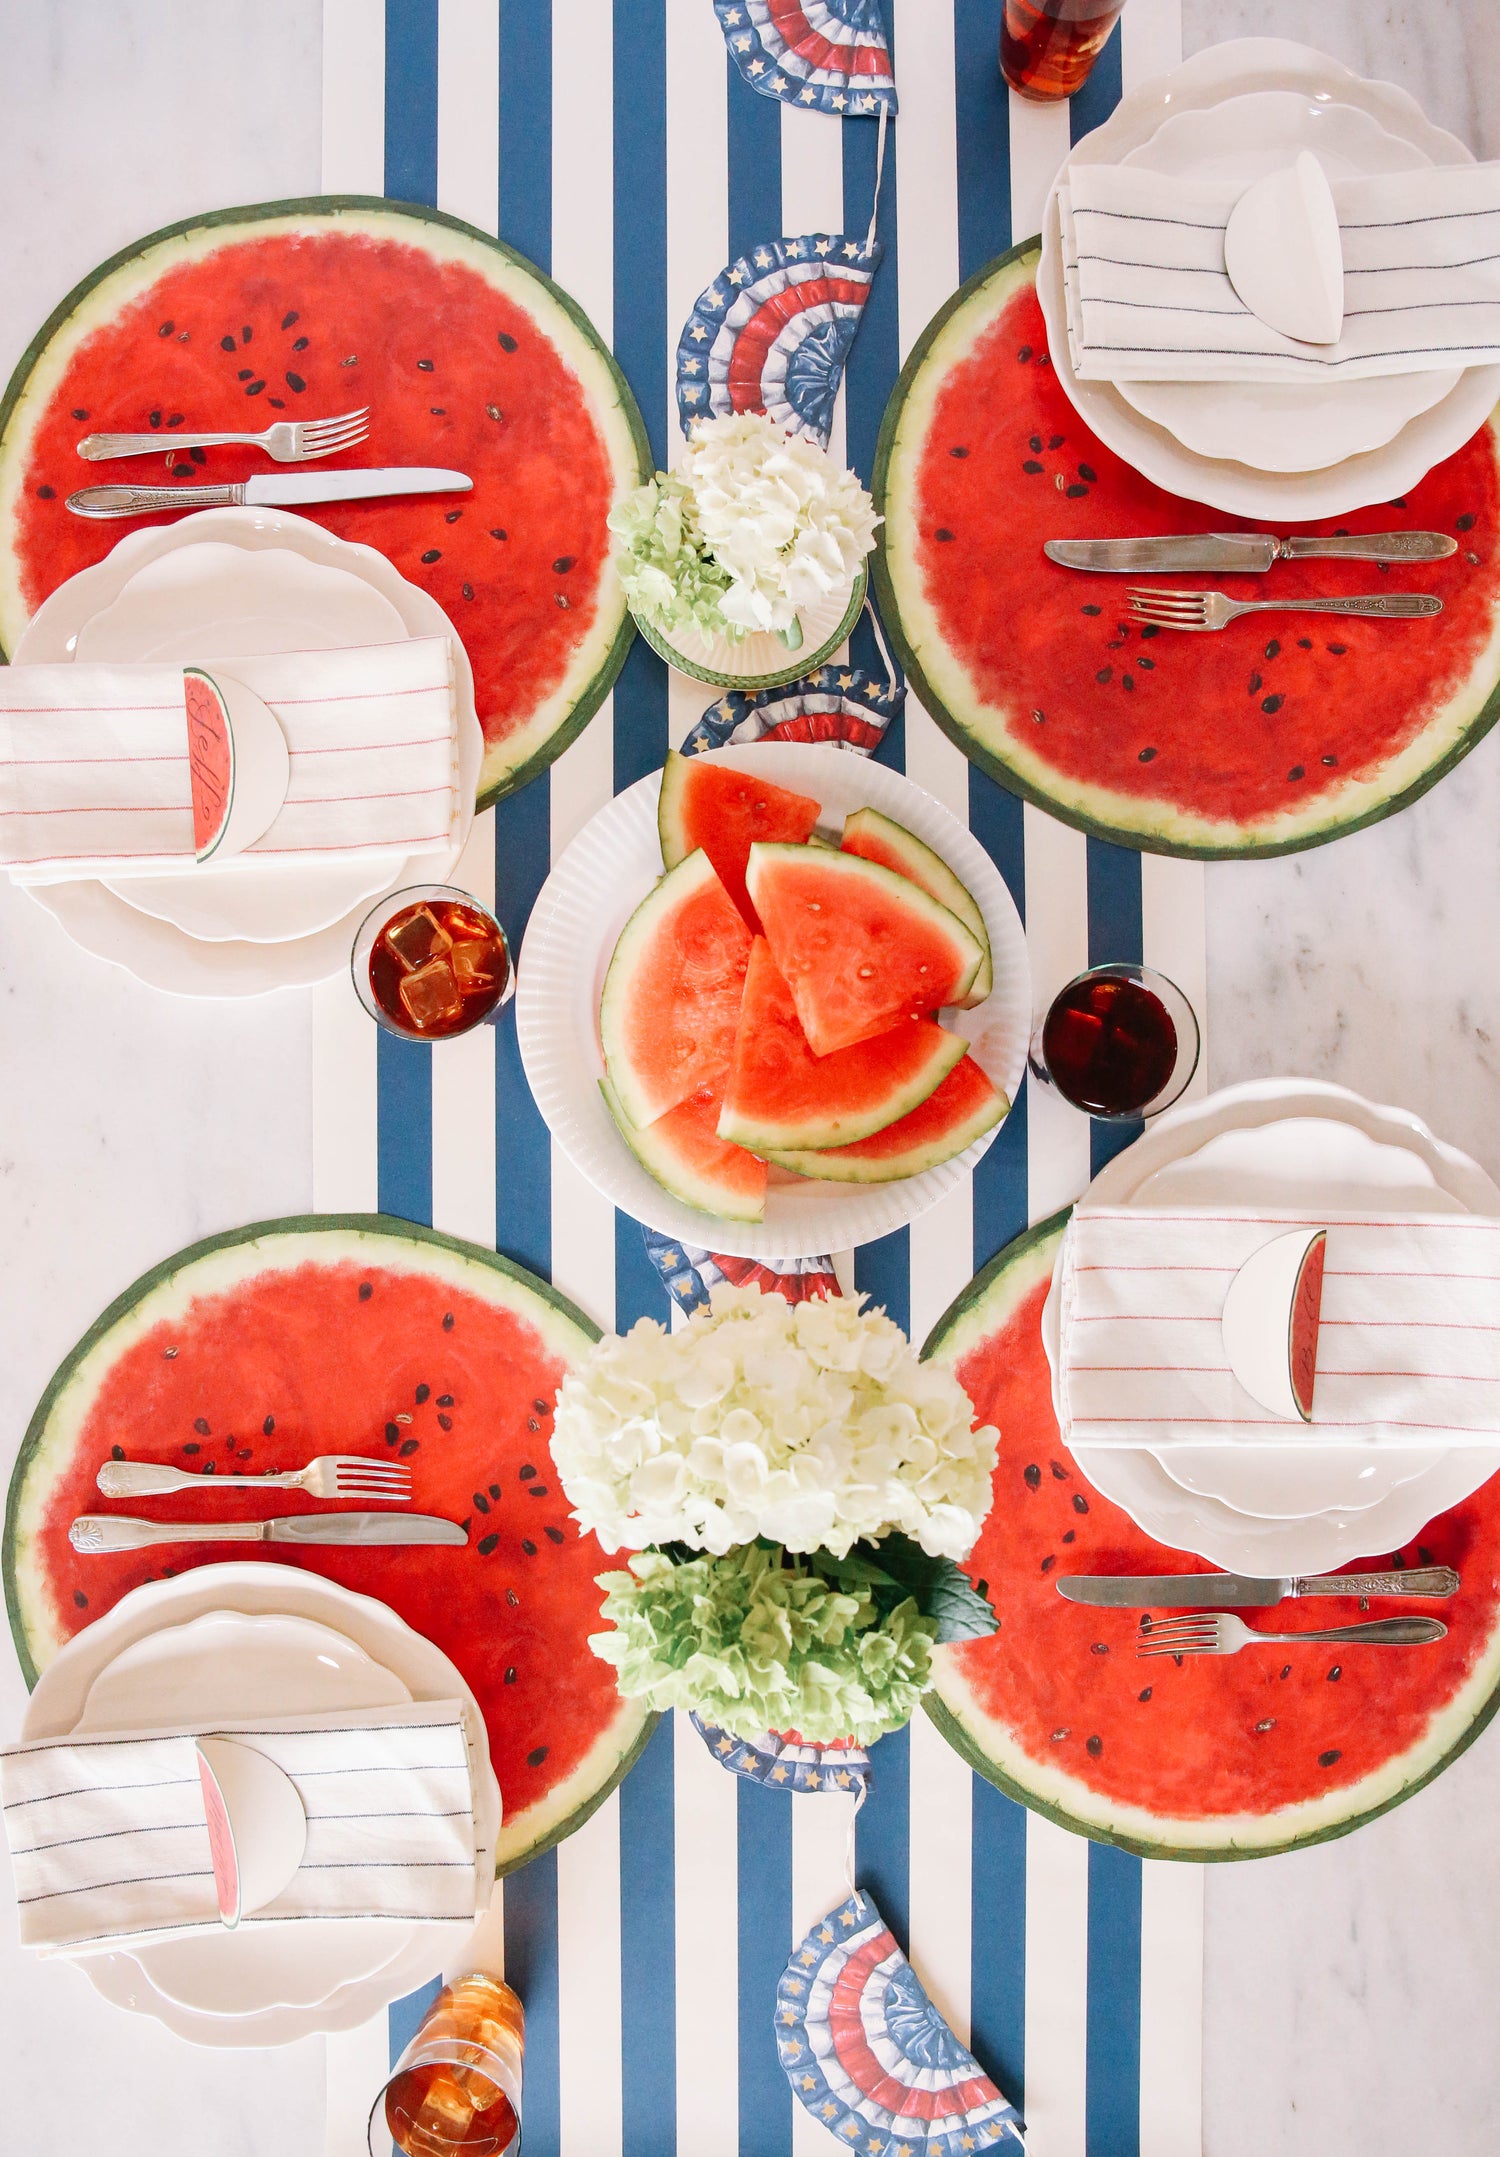 The Die-cut Watermelon Placemat under an elegant summertime table setting for four, from above.